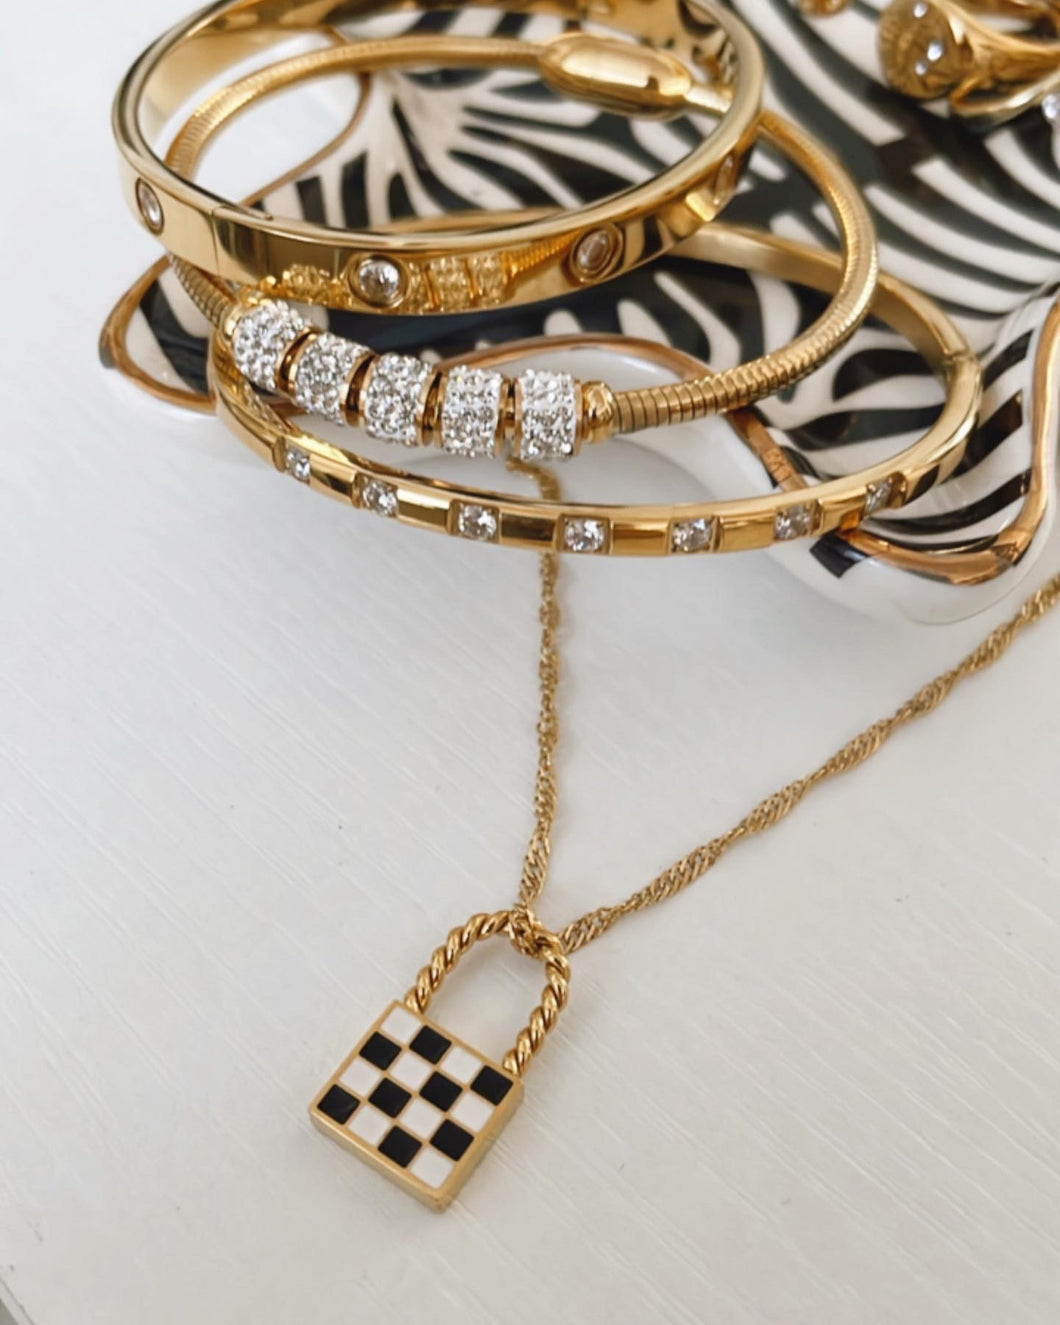 Checkered Lock Necklace